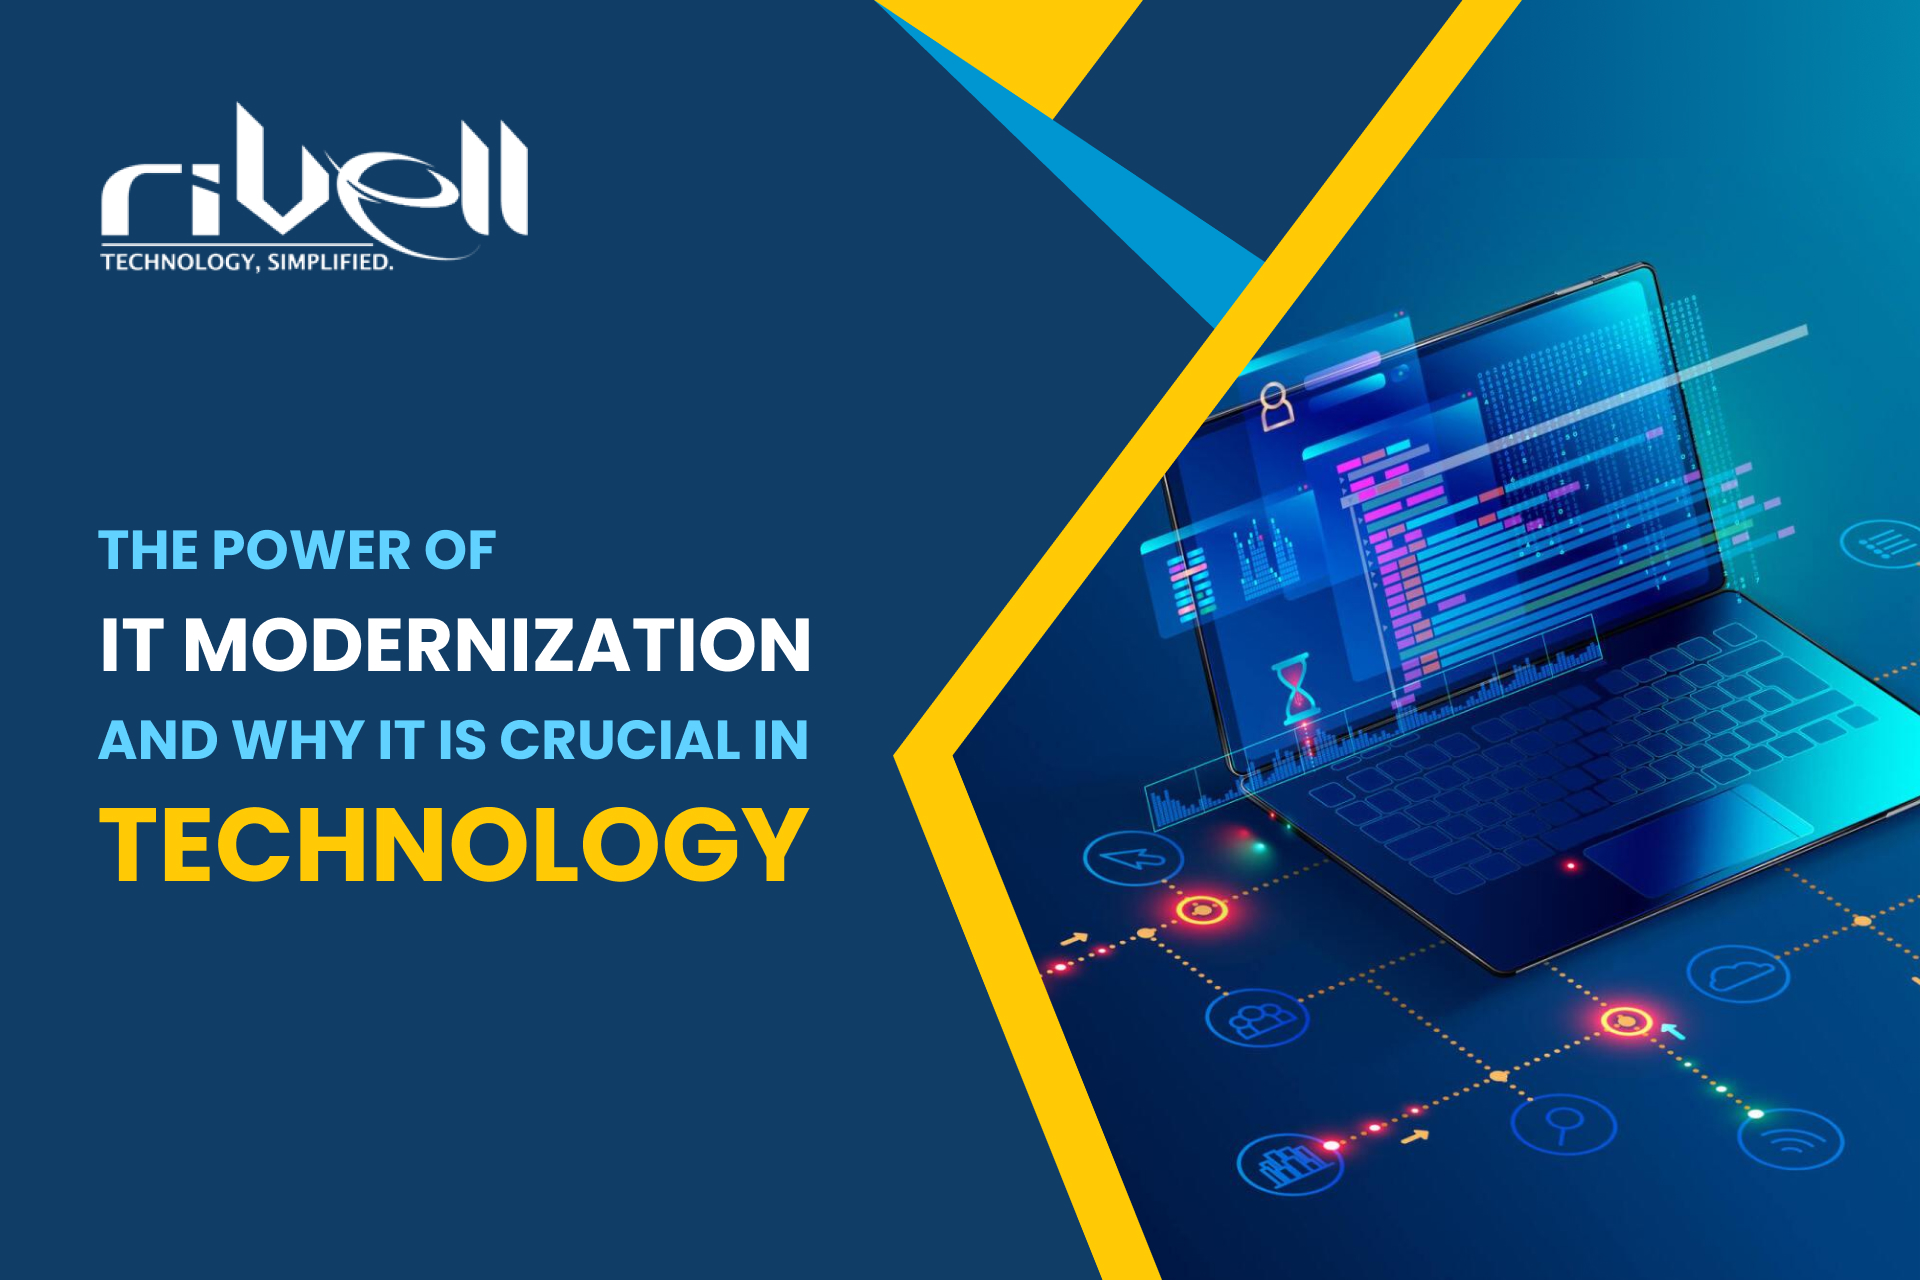 The Power Of IT Modernization & Why It Is Crucial in Technology